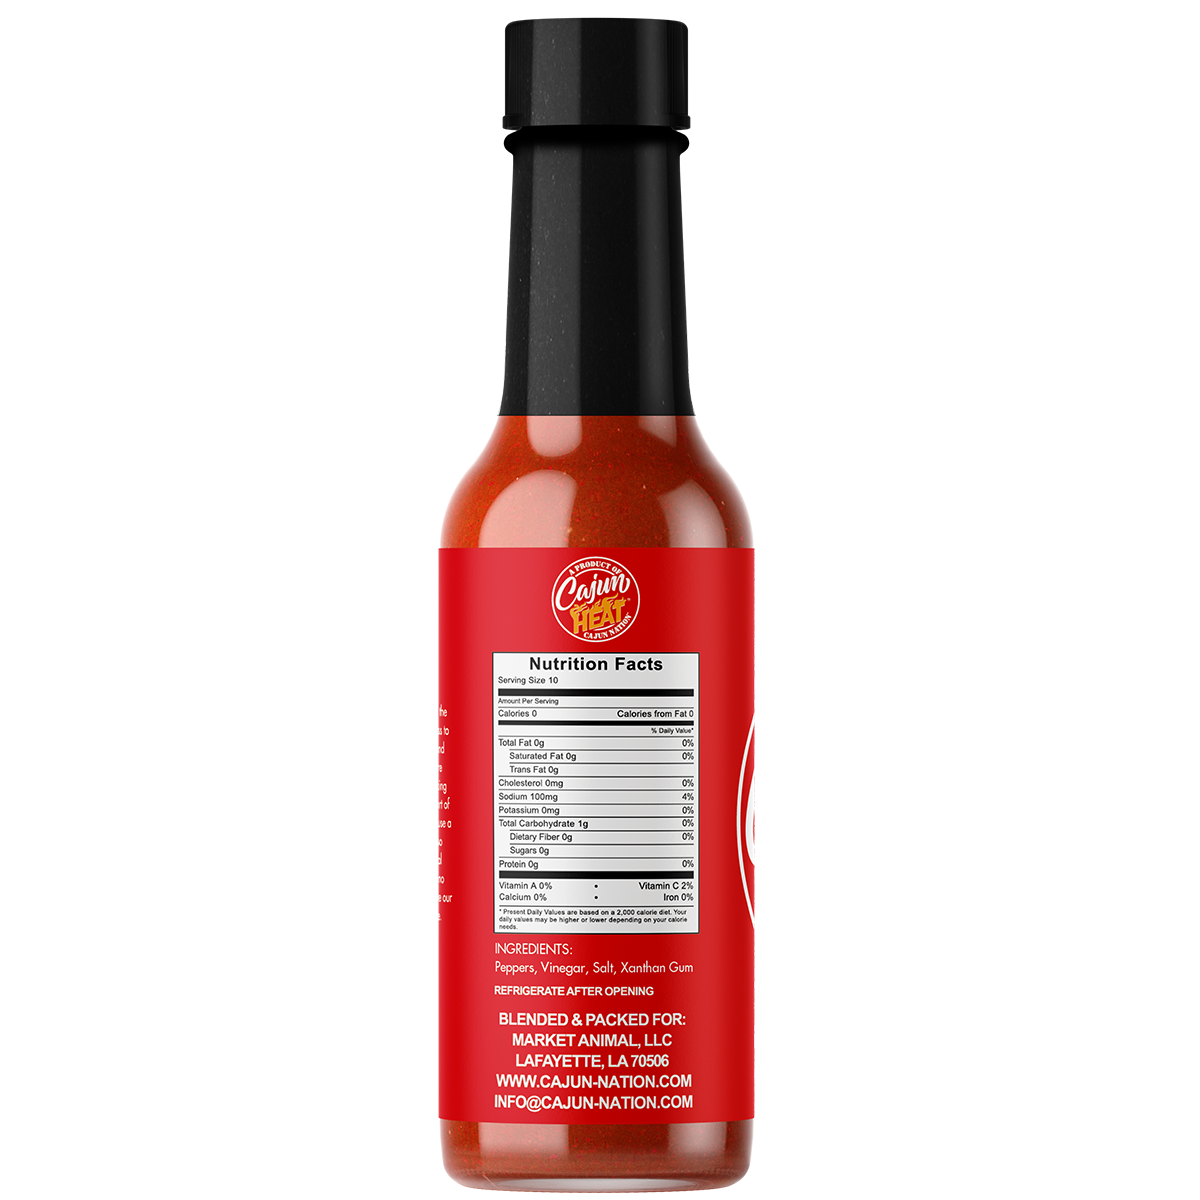  Cajun Nation Cajun Heat Low Sodium Louisiana Hot Sauce is a Certified Cajun LOW SODIUM 5 fluid ounces, flavorful blend of Louisiana Red Peppers with No MSG.  It contains 100mg of sodium.  Made in Cajun Nation, Louisiana along the Cajun Coast. 